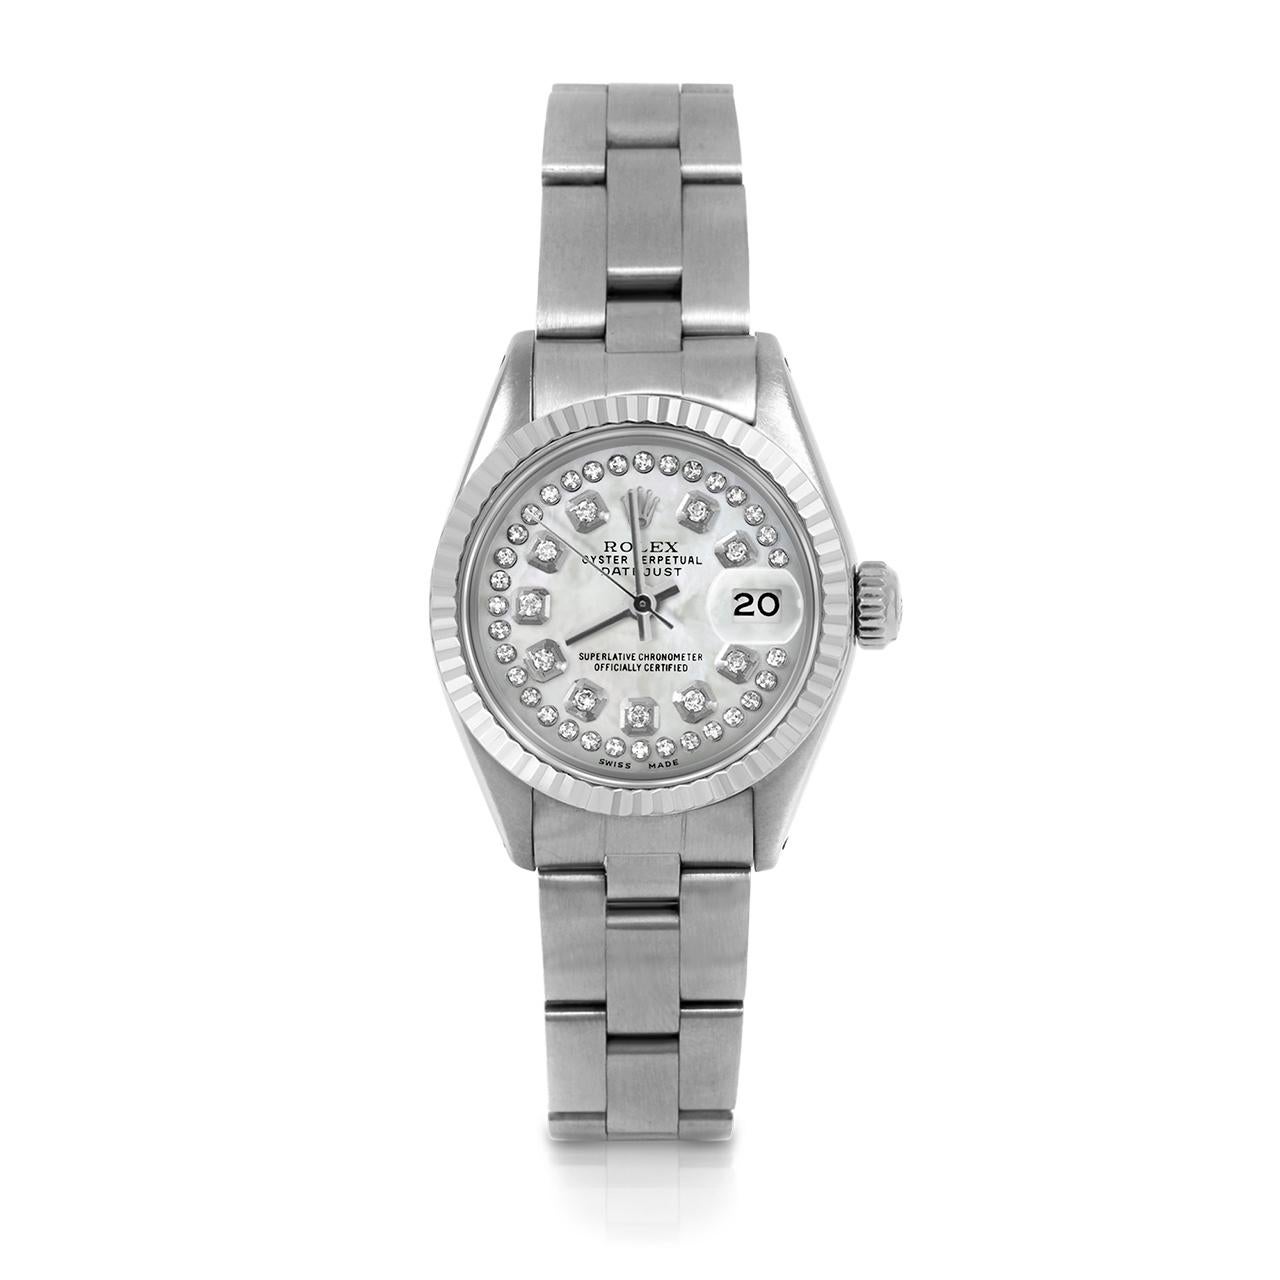 Pre-Owned Rolex 6917 Ladies 26mm Datejust Watch, Custom White Mother of Pearl String Diamond Dial & Fluted Bezel on Rolex Stainless Steel Oyster Band.   

SKU 6917-SS-WMOP-STRD-FLT-OYS


Brand/Model:        Rolex Datejust
Model Number:       